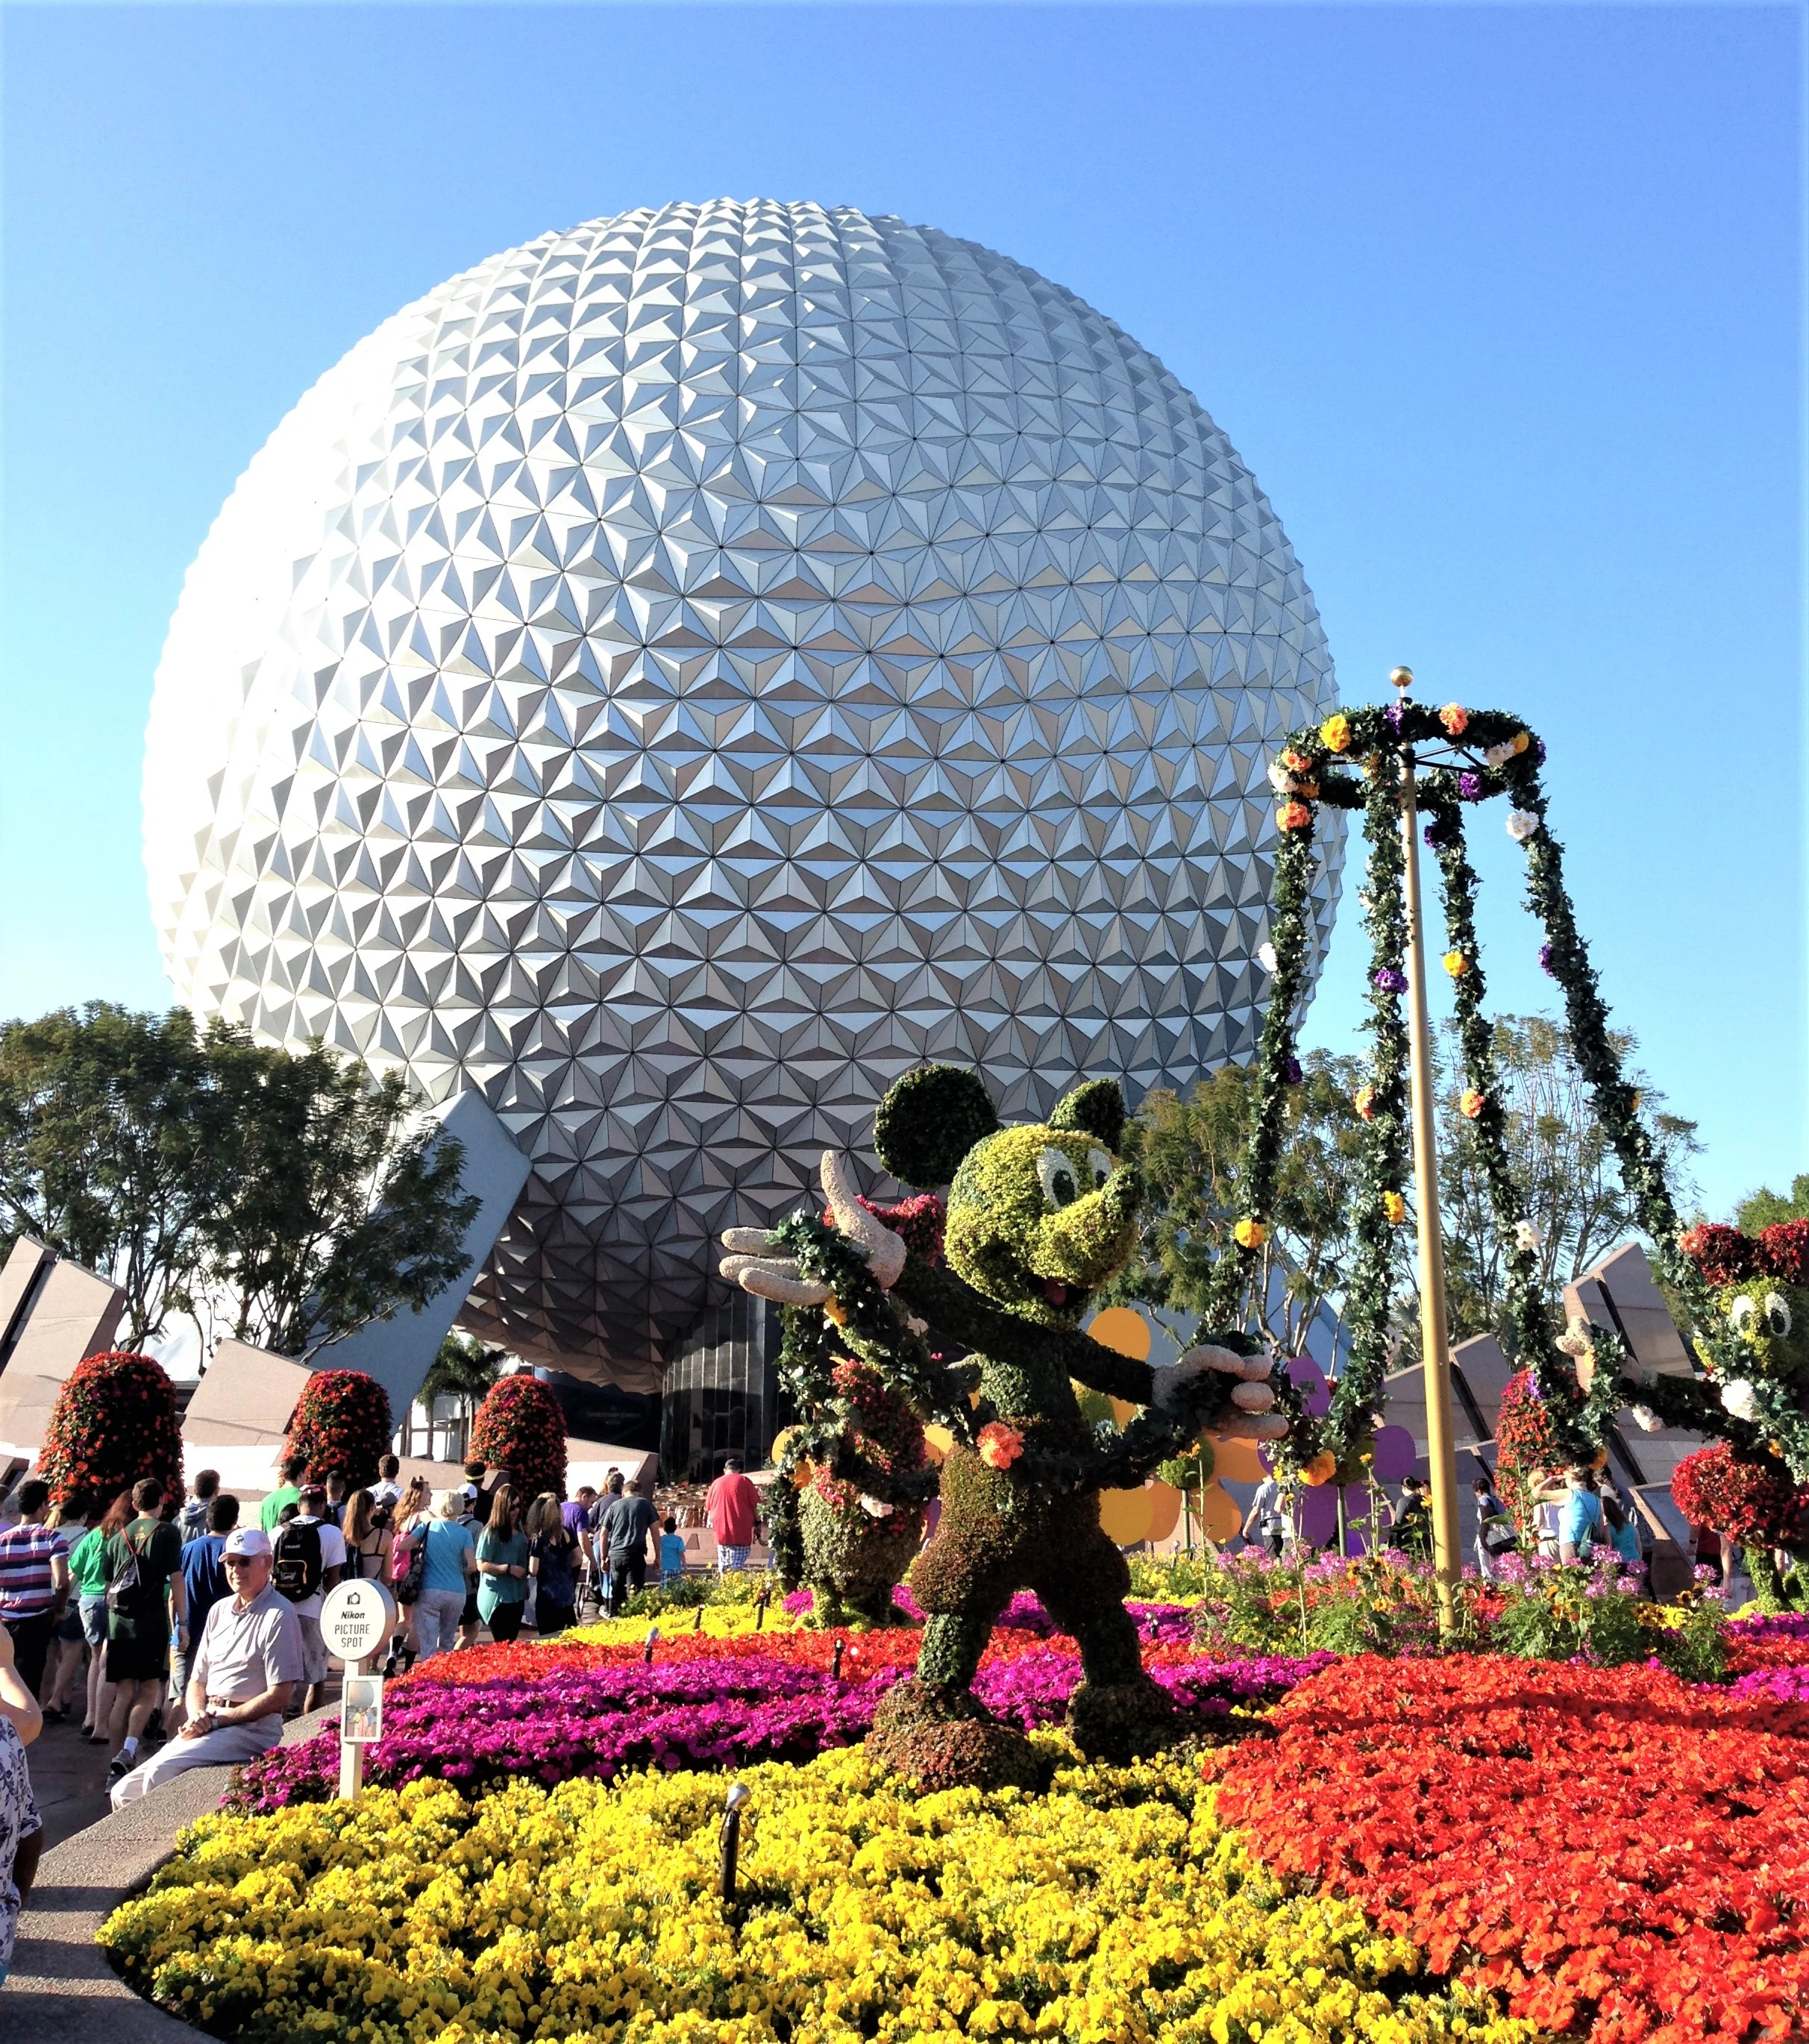 spaceship earth with flowers - disney world weather in march